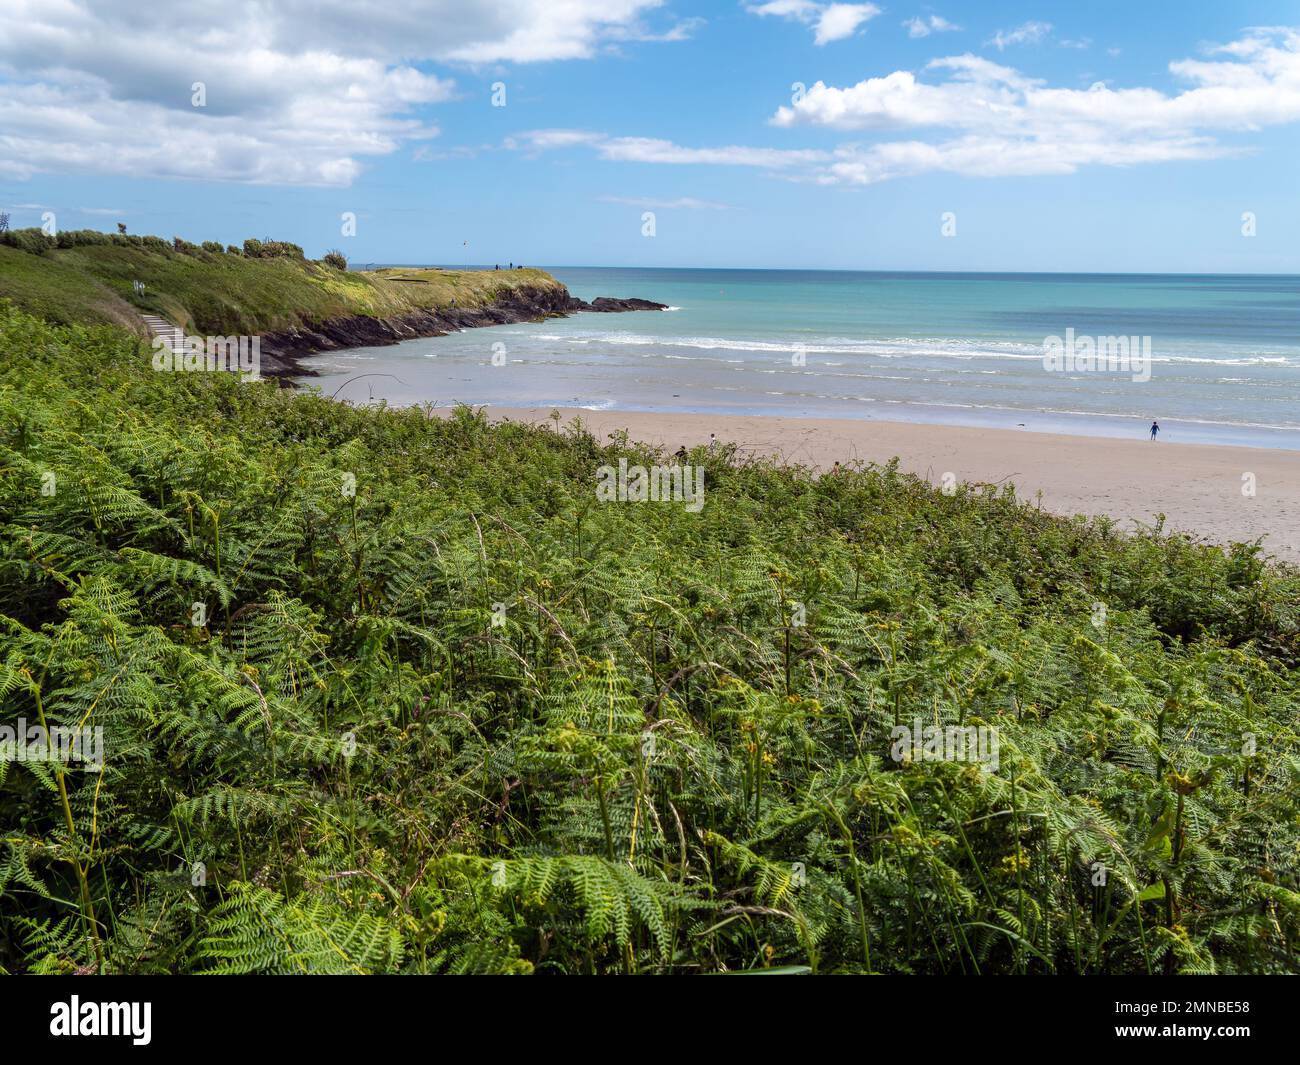 Dense vegetation on the shores of the Atlantic Ocean in Ireland on a fine day. Picturesque Irish seascape. Green plants near body of water Stock Photo